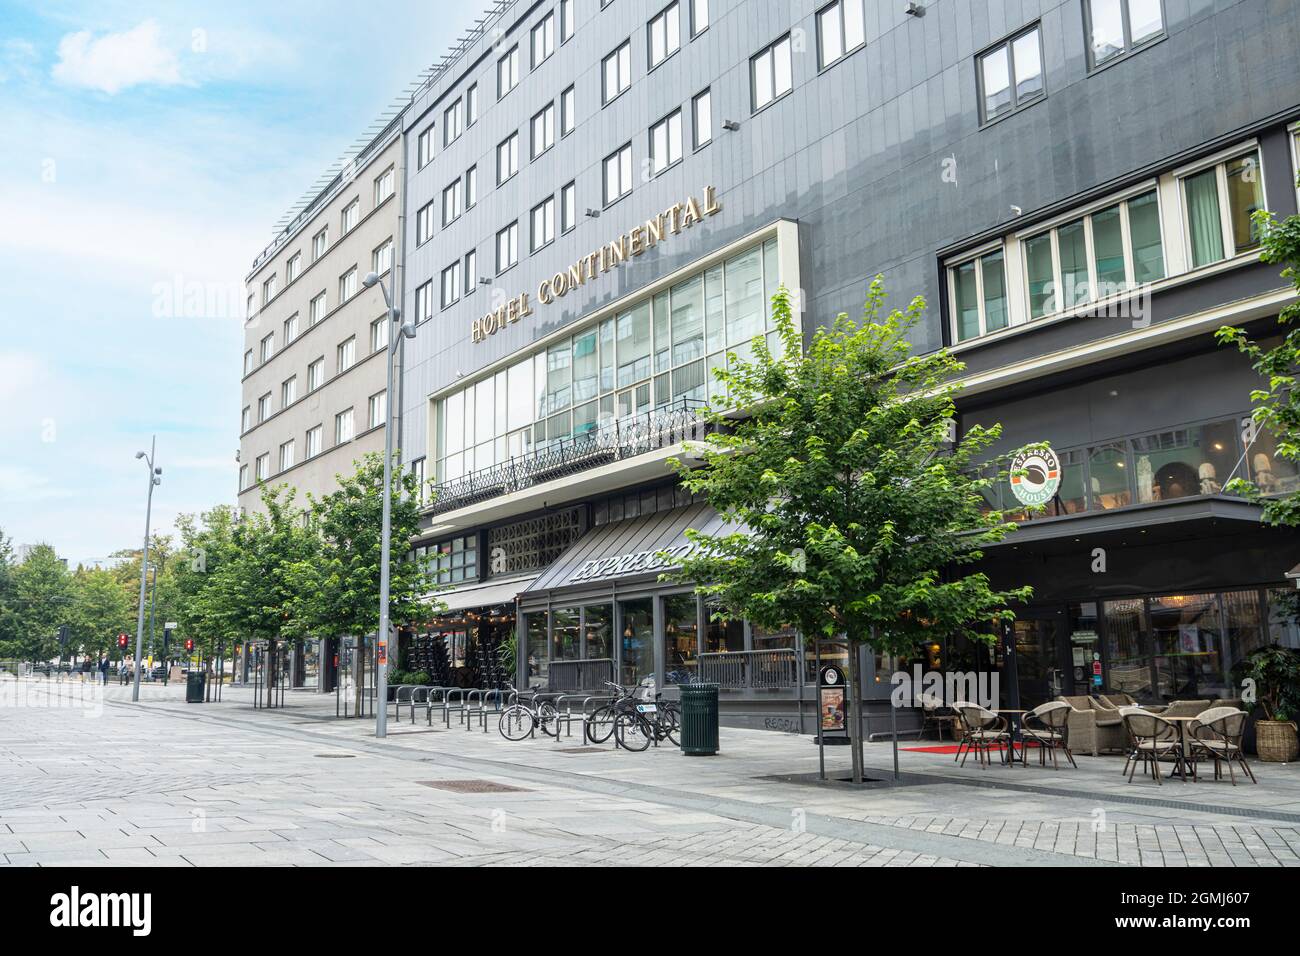 Oslo, Norway. September 2021. the outdoor view of the Continental Hotel in the city center Stock Photo